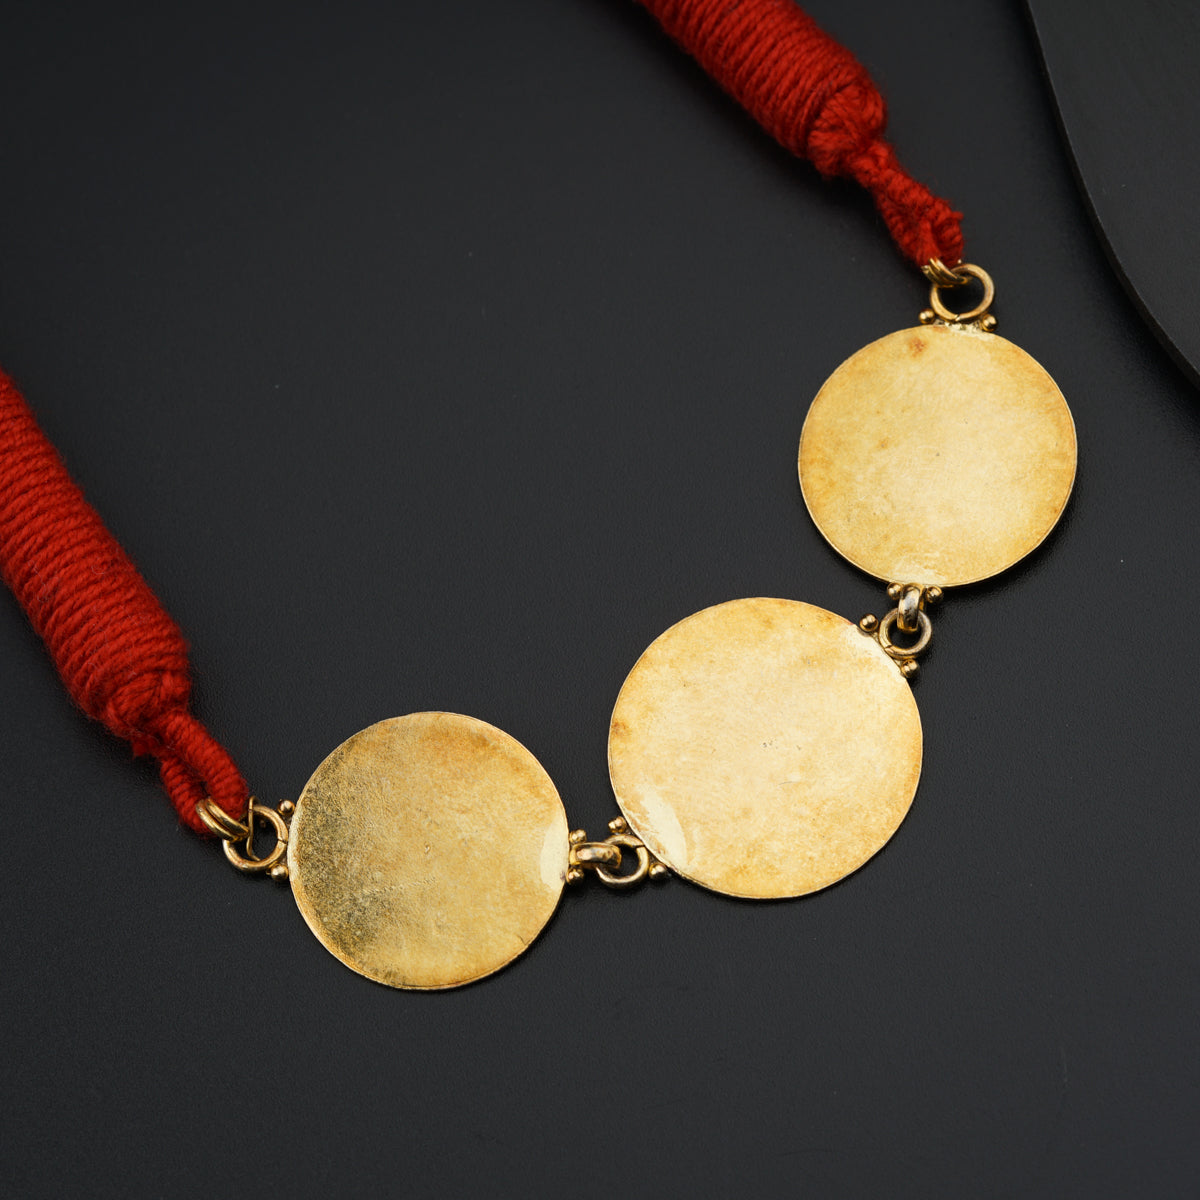 a necklace with three discs on a red string